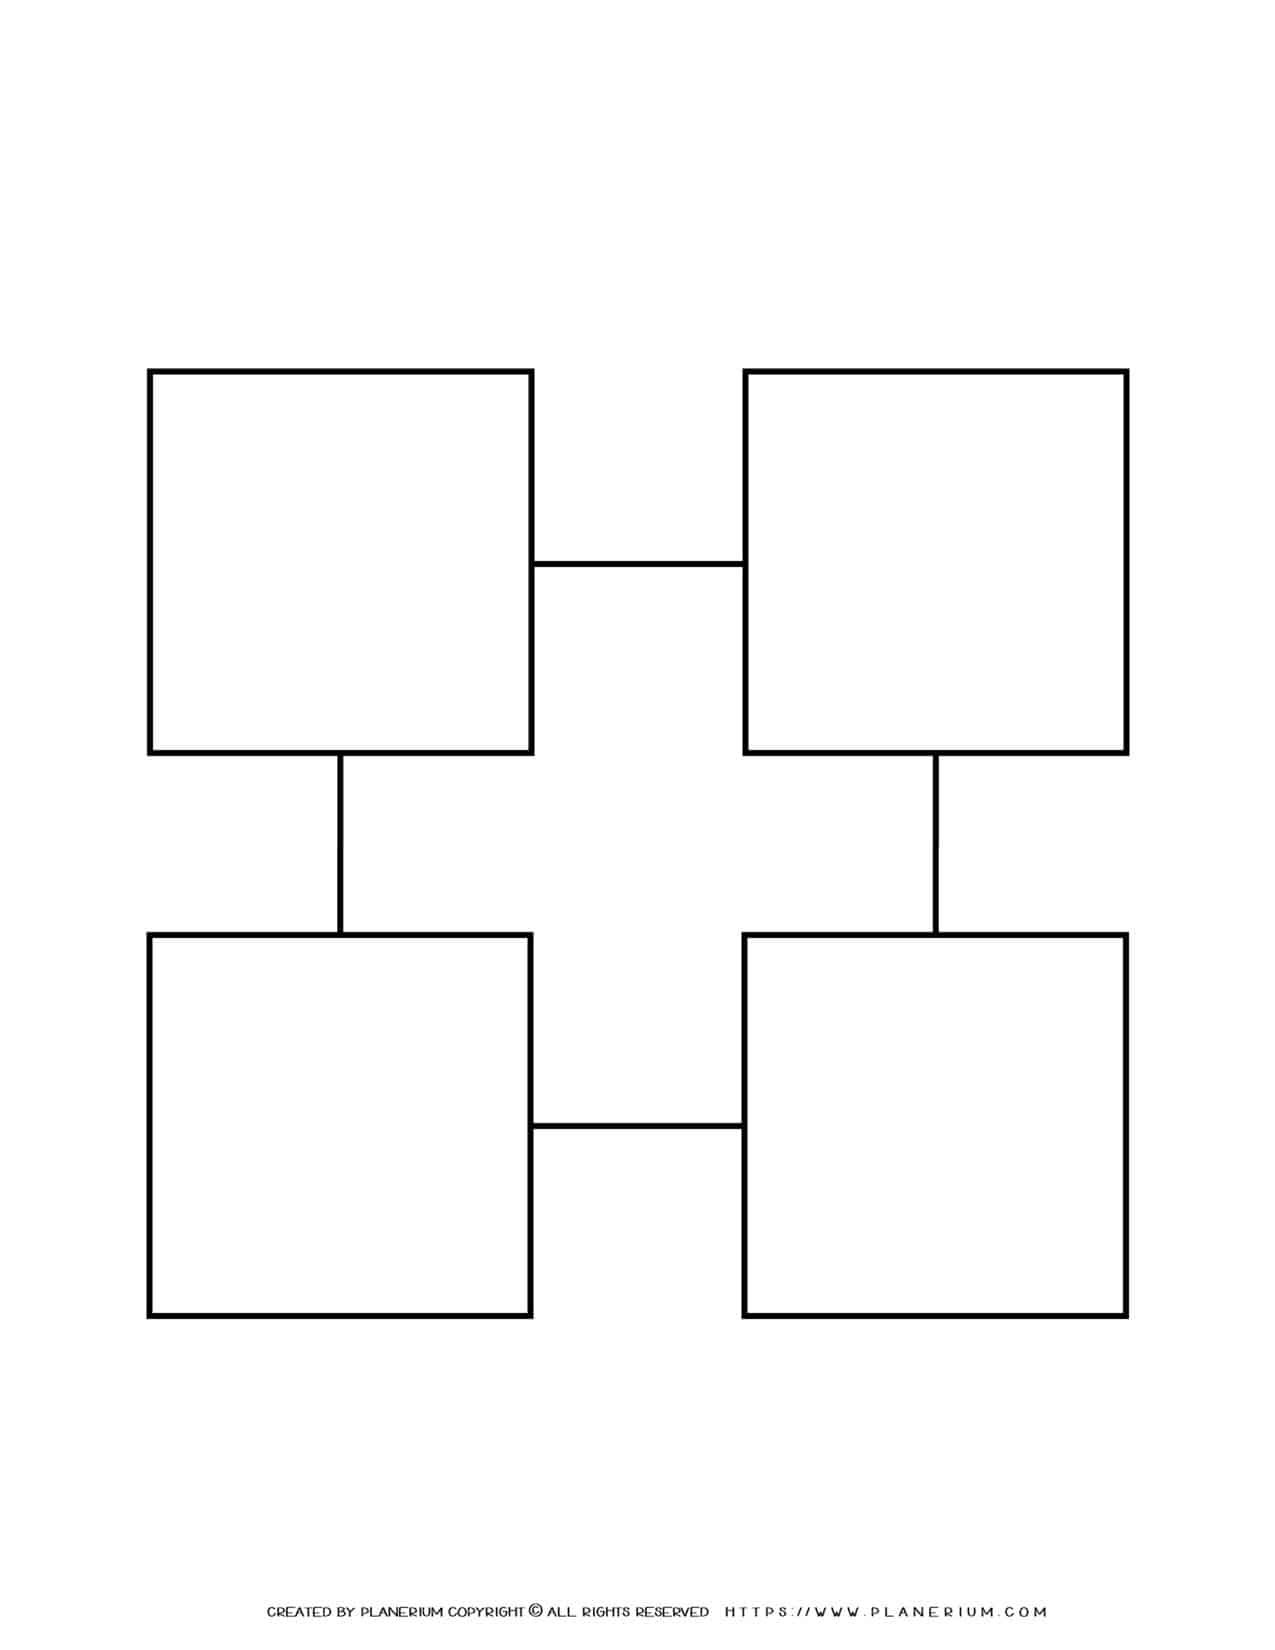 Sequence Chart Template - Four Squares on a Square